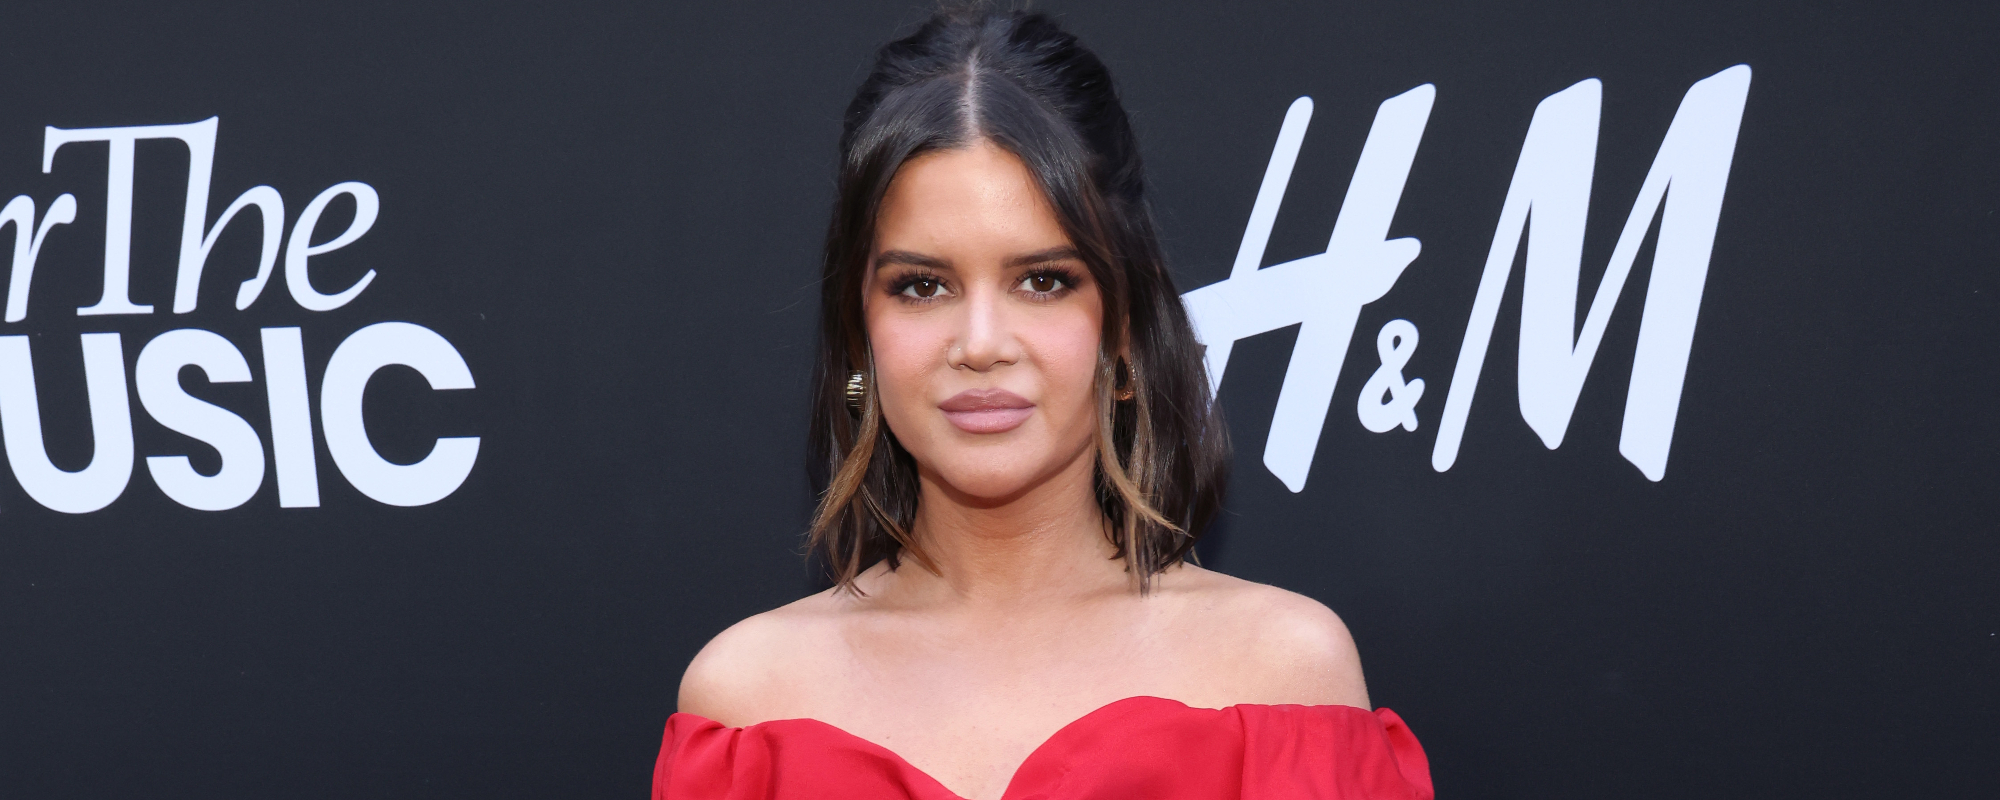 Maren Morris Details Gutting Through Illness to Record With Teddy Swims: “Feeling Like You See God”